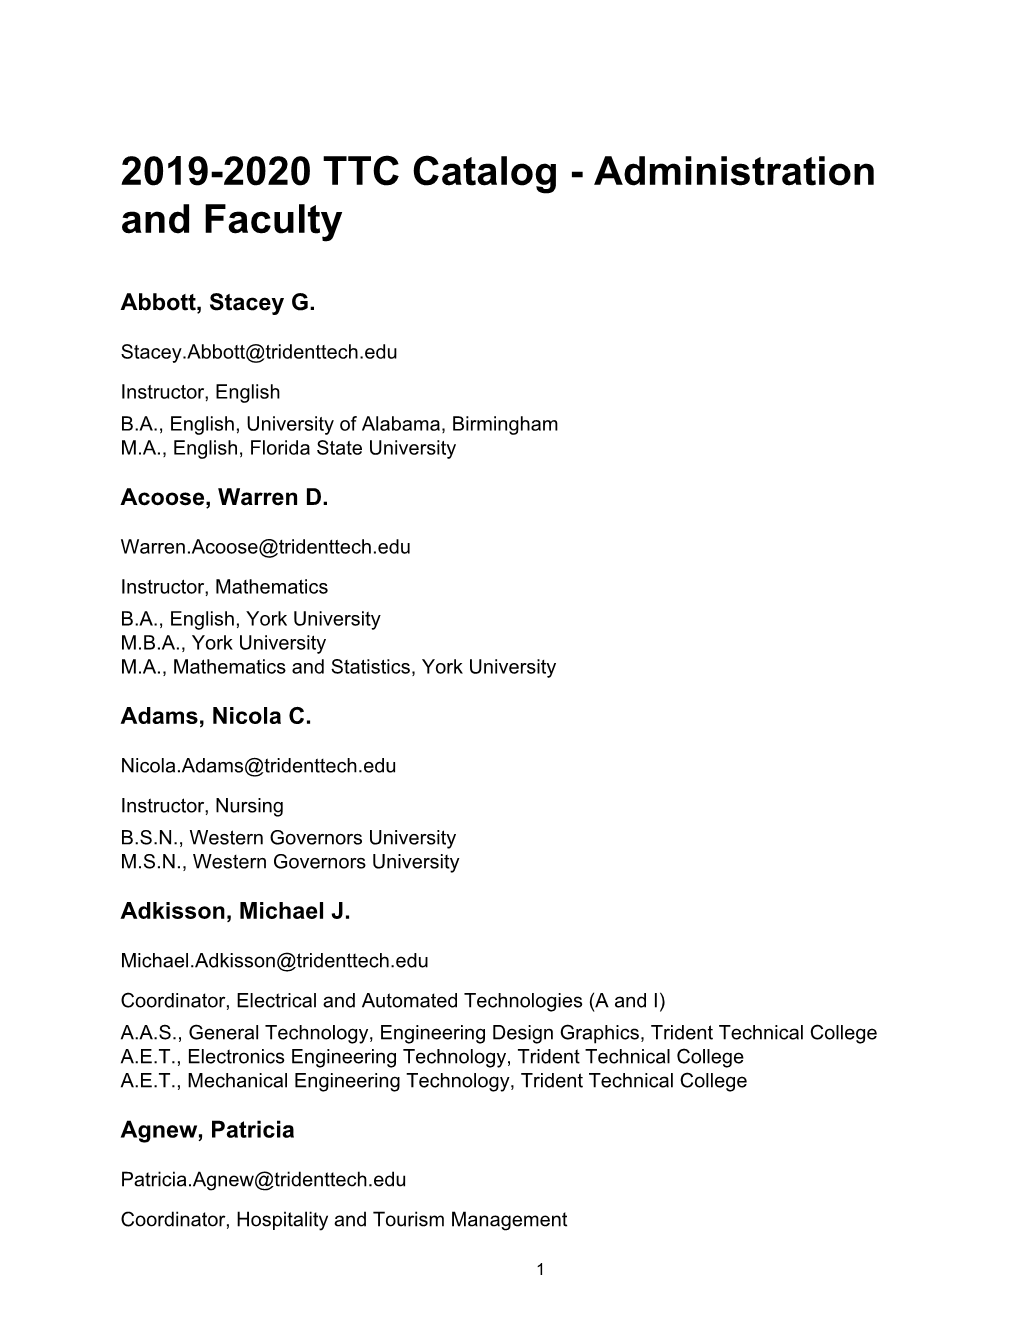 2019-2020 TTC Catalog - Administration and Faculty